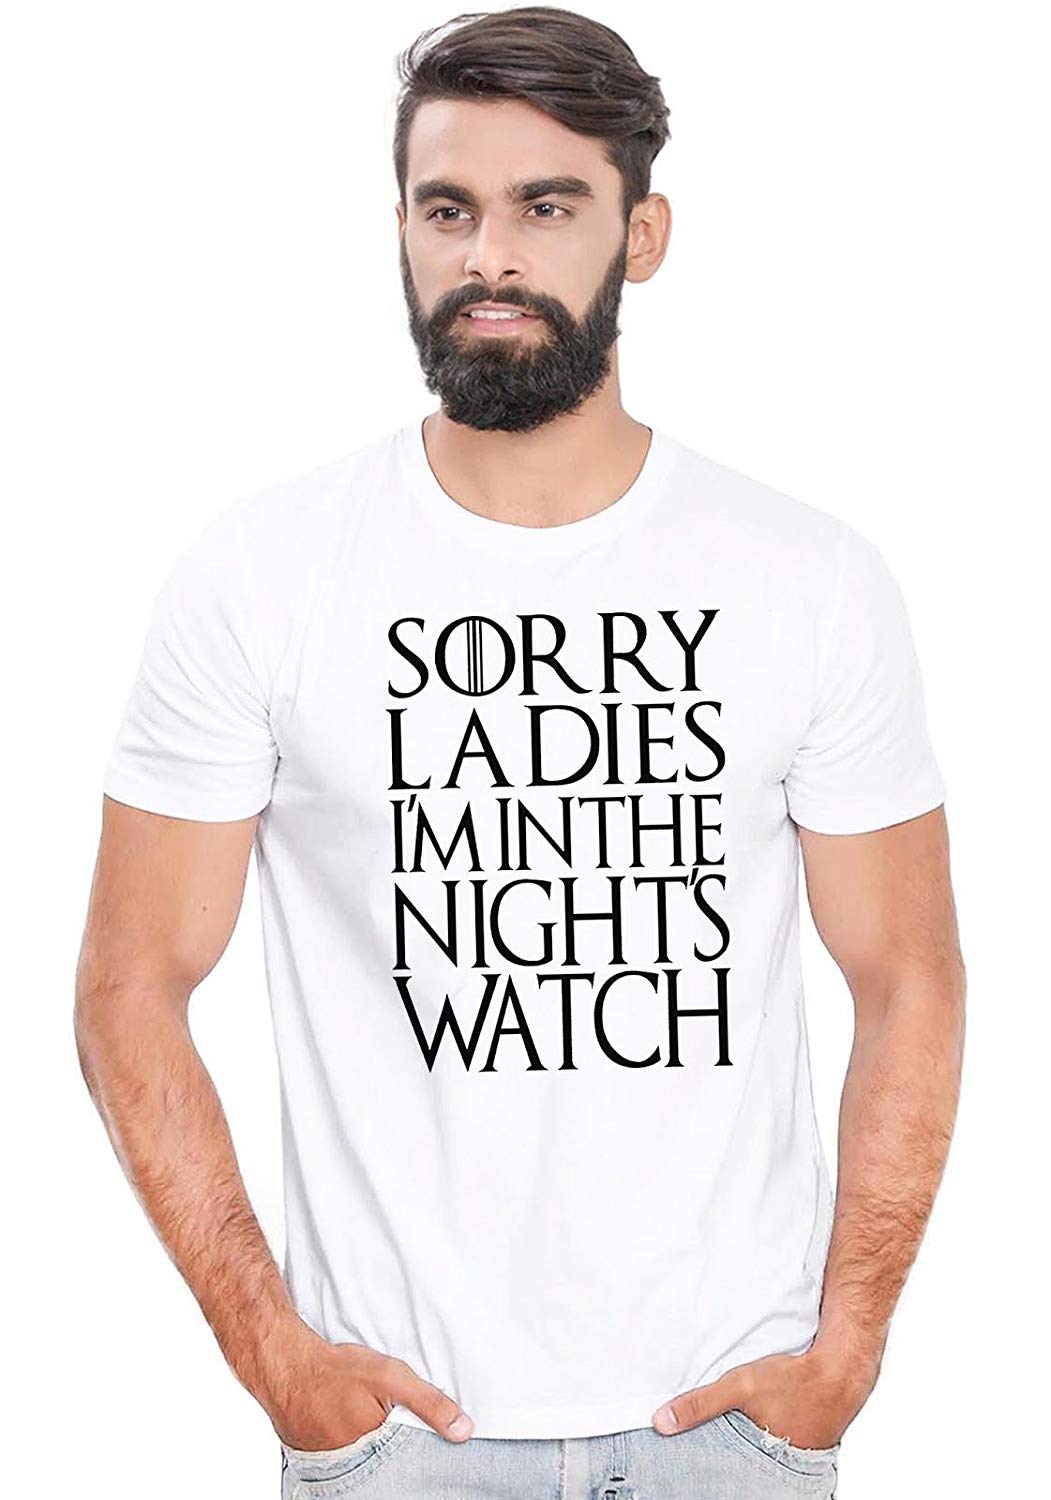 DOUBLE F ROUND NECK HALF SLEEVE WHITE COLOR SORRY LADIES I AM IN THE NIGHT WATCH PRINTED T-SHIRT FOR MEN